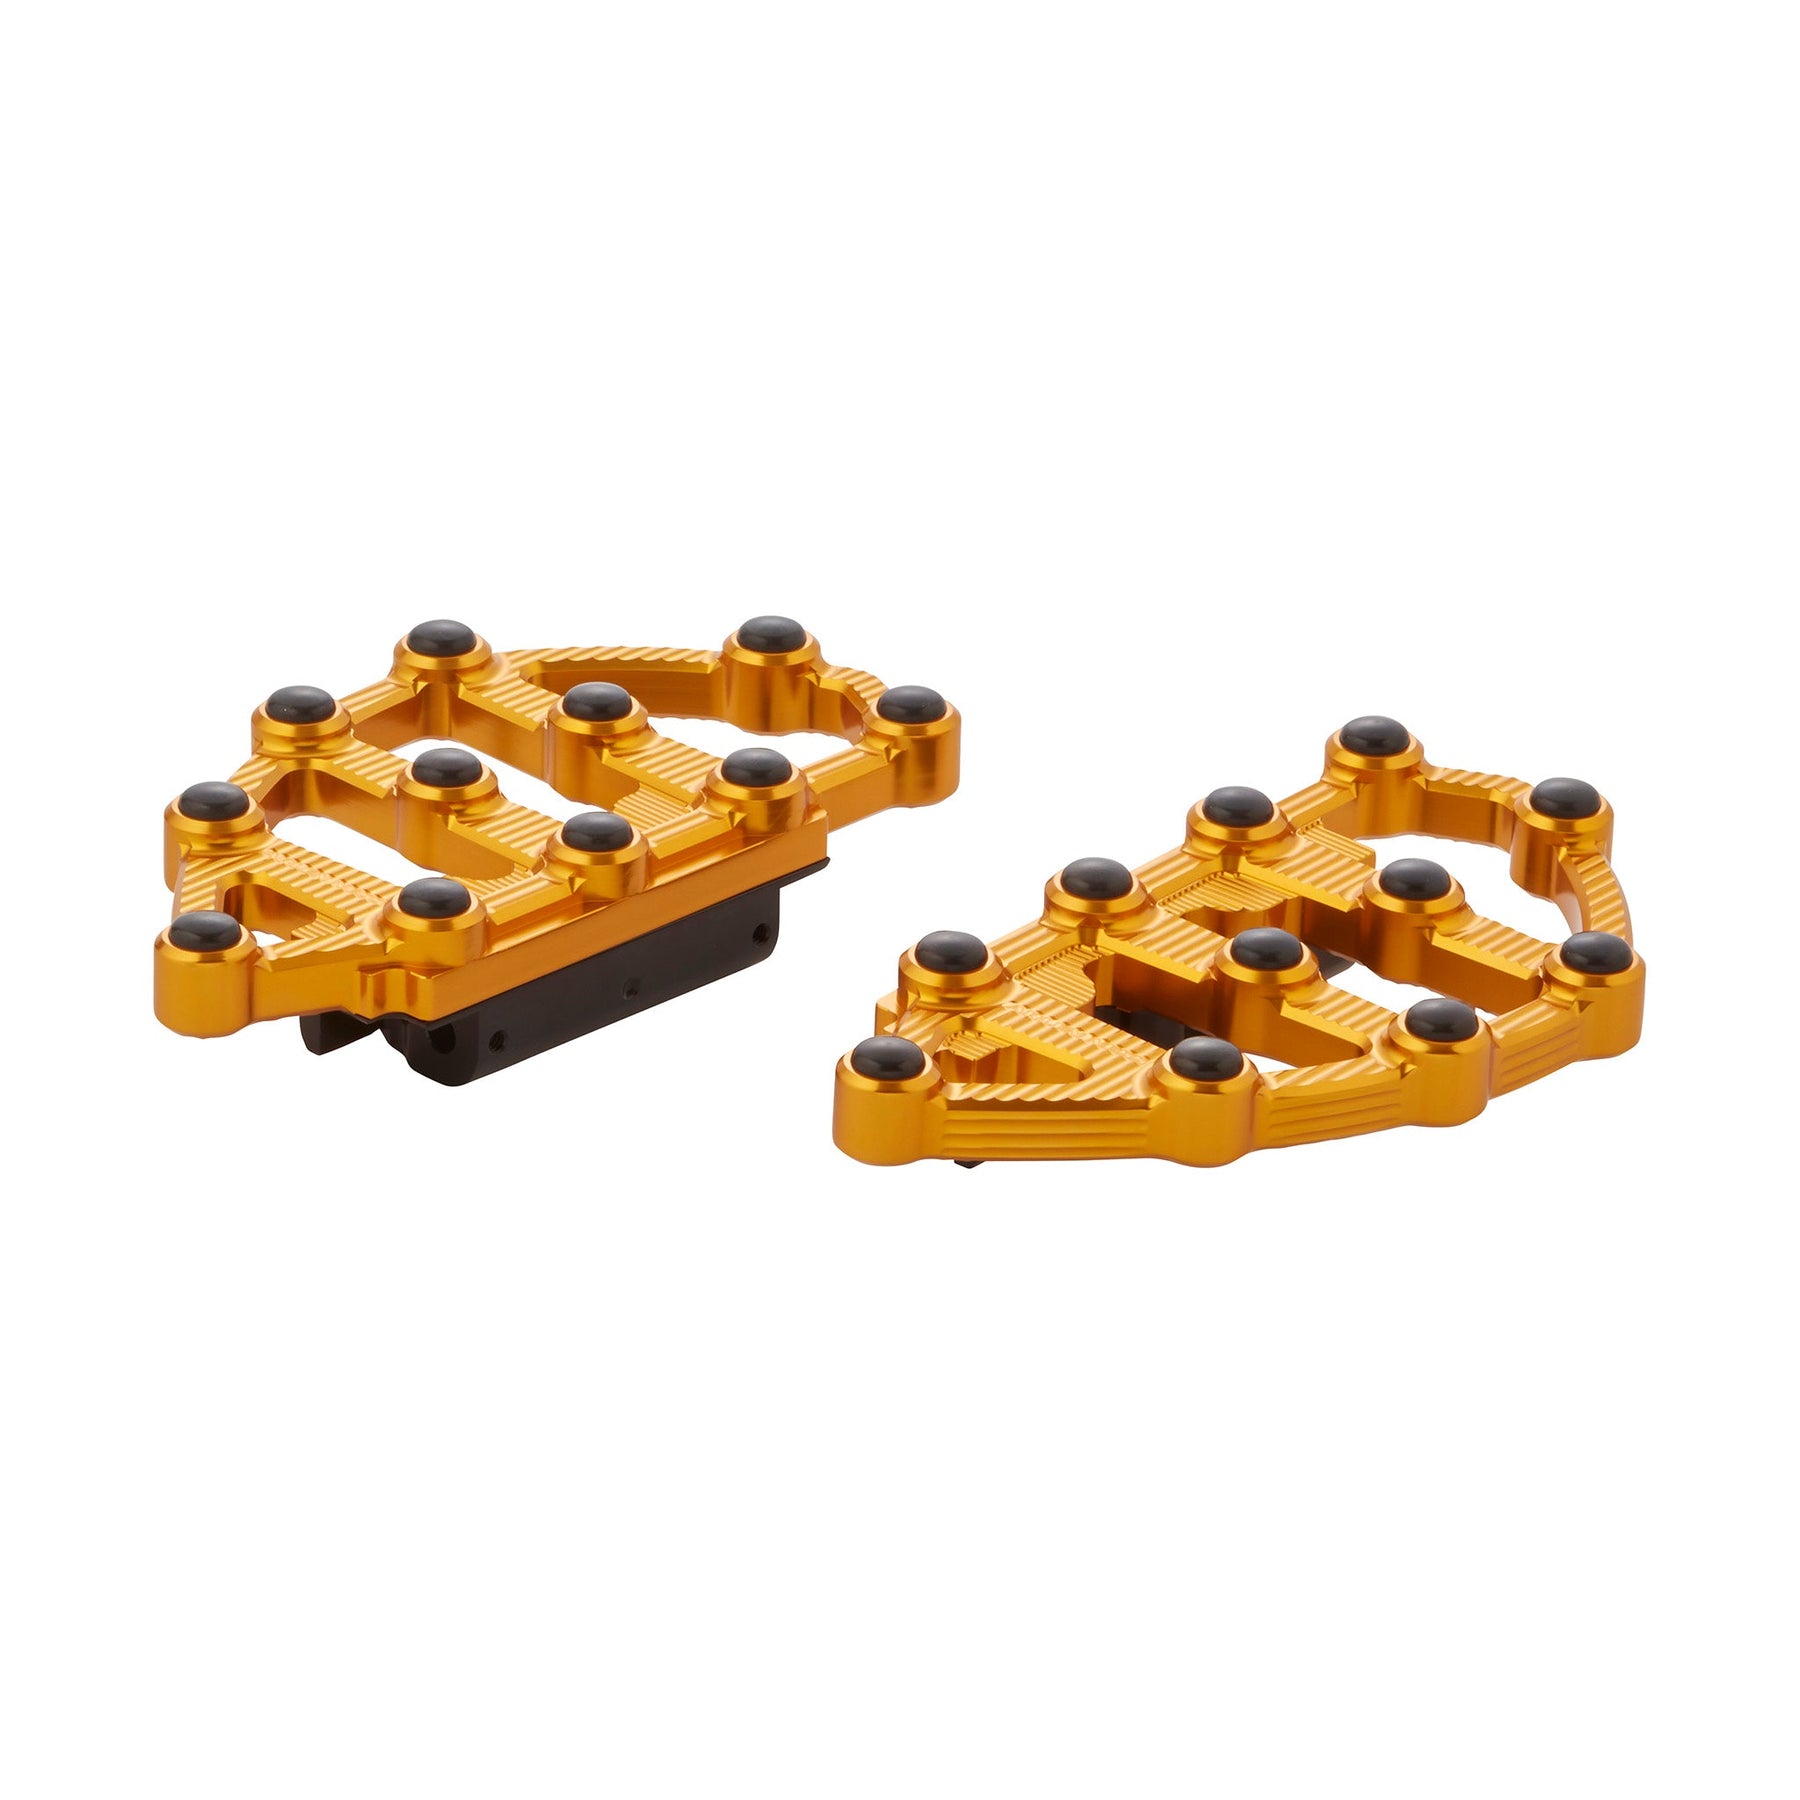 Ness-MX Passenger Floorboards For Indian, Gold